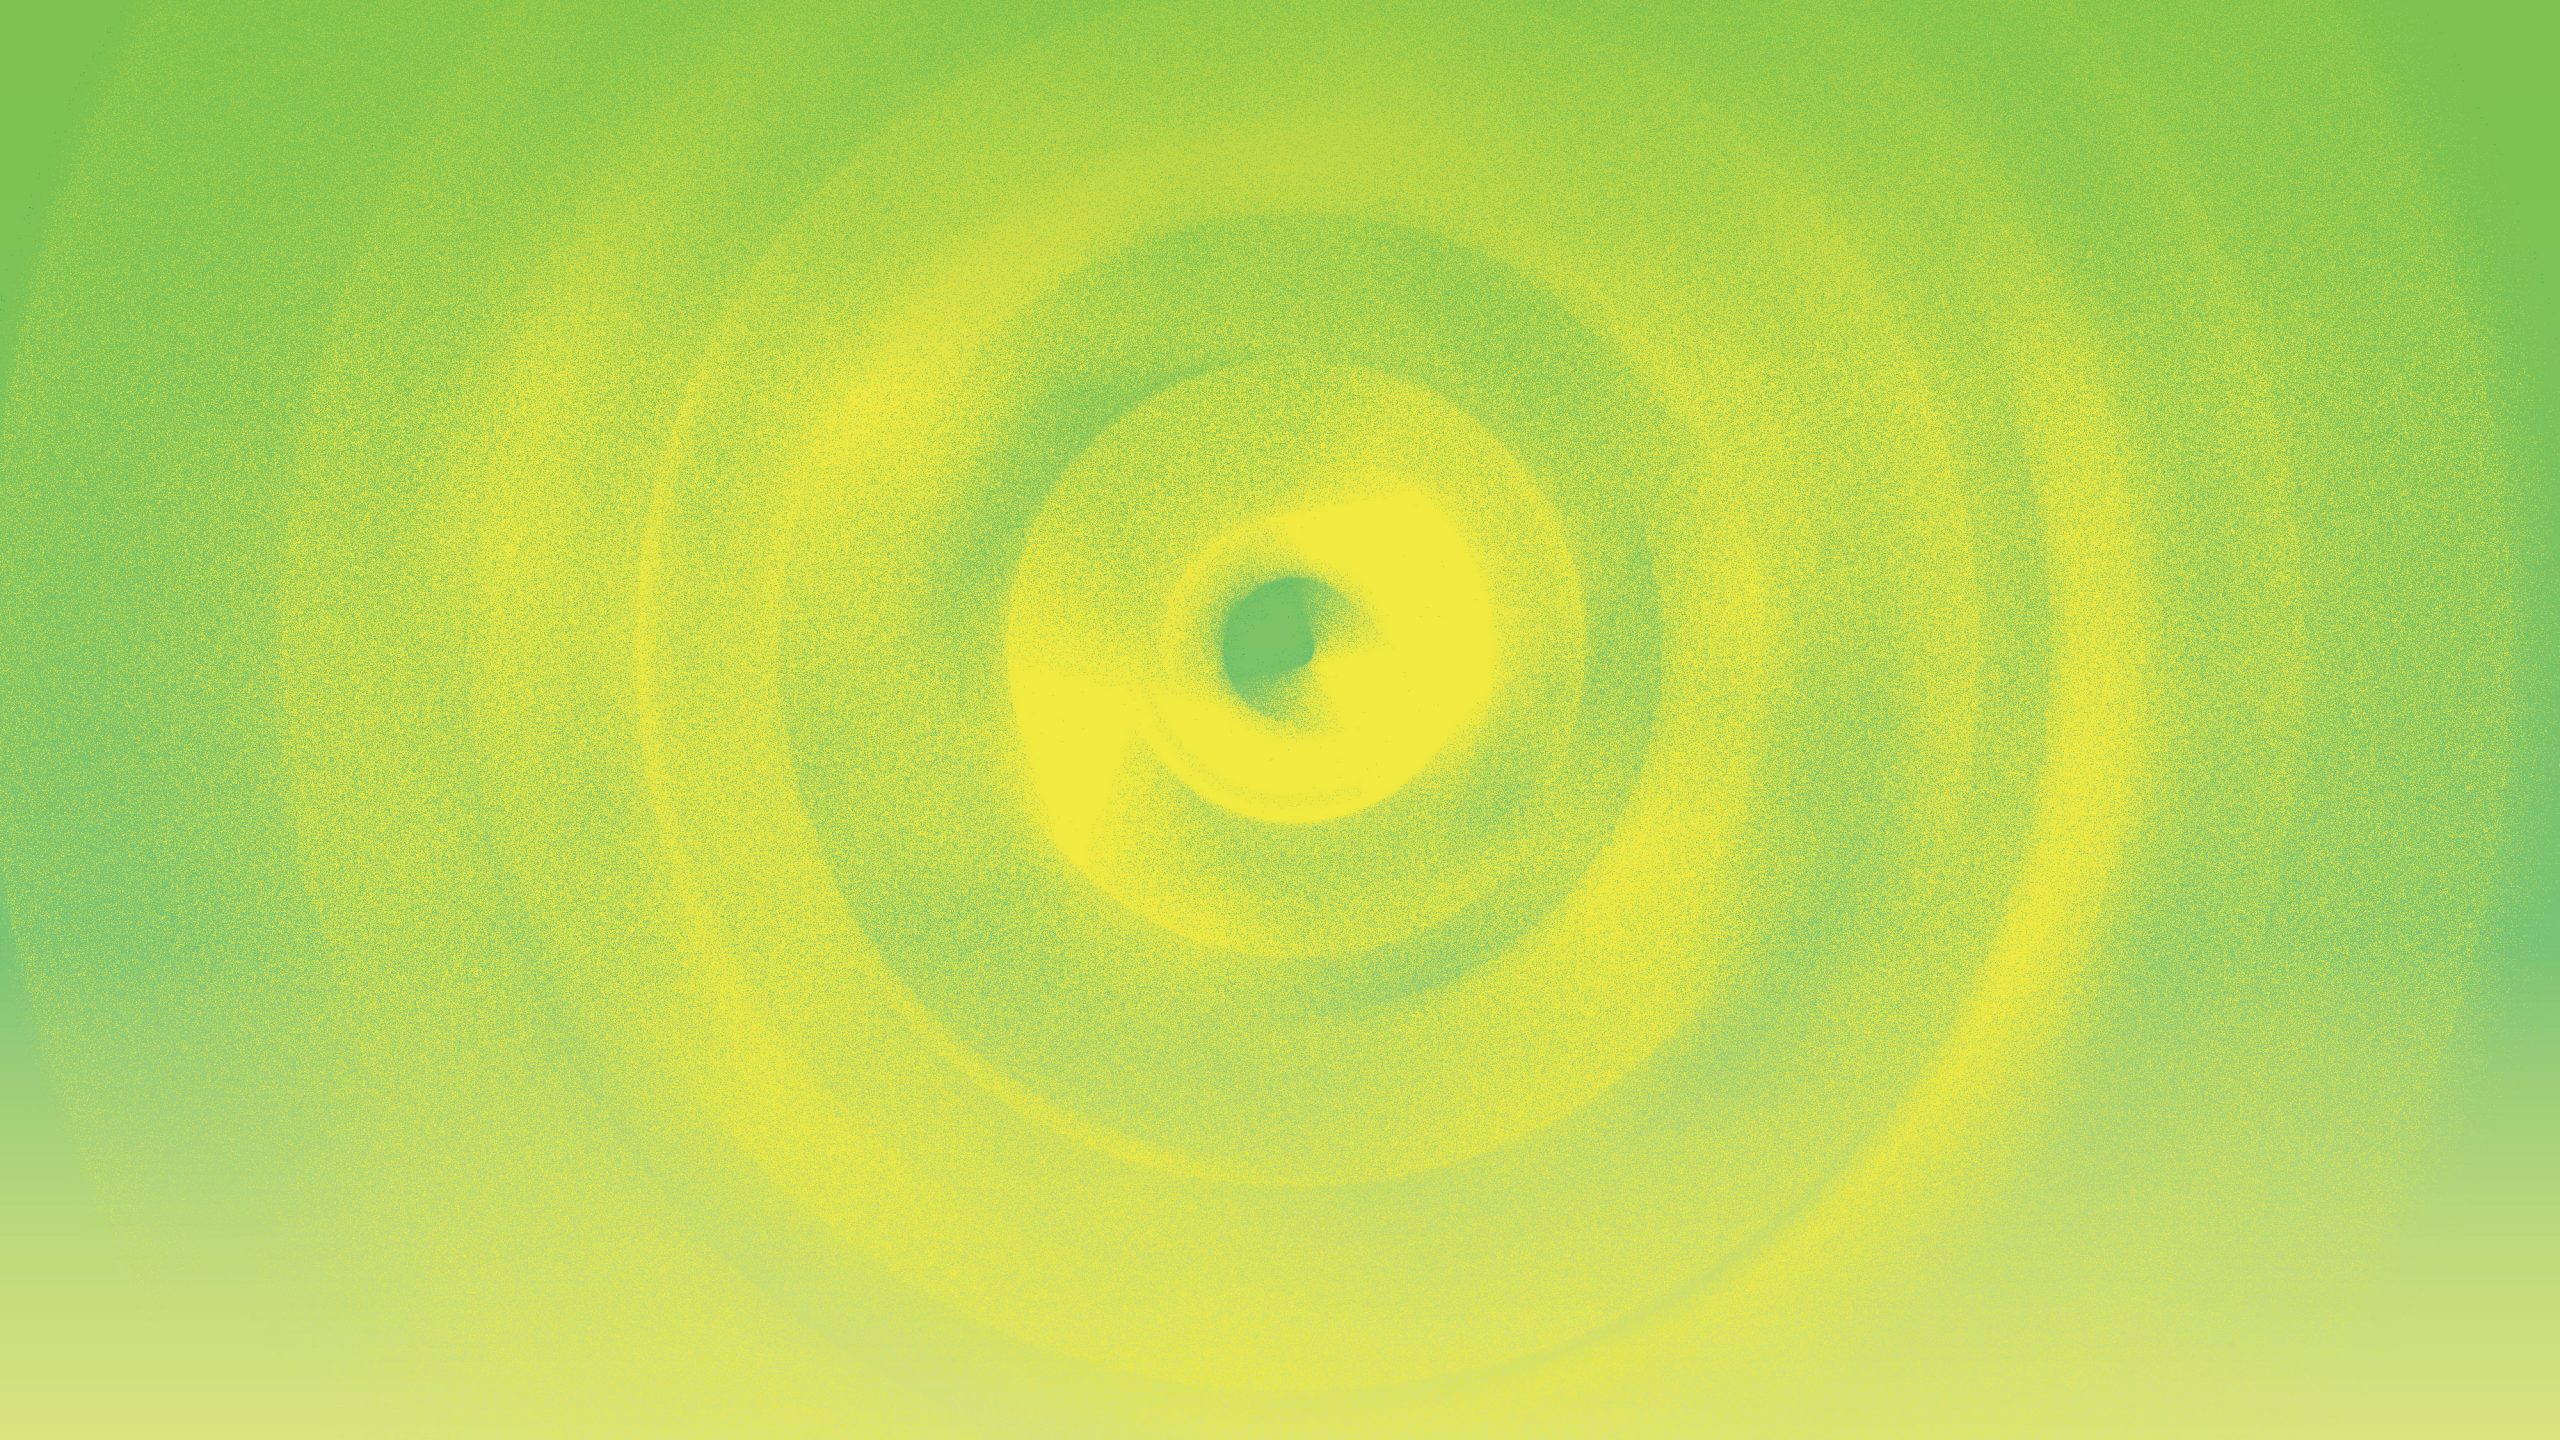 Spiral circle asbstract background